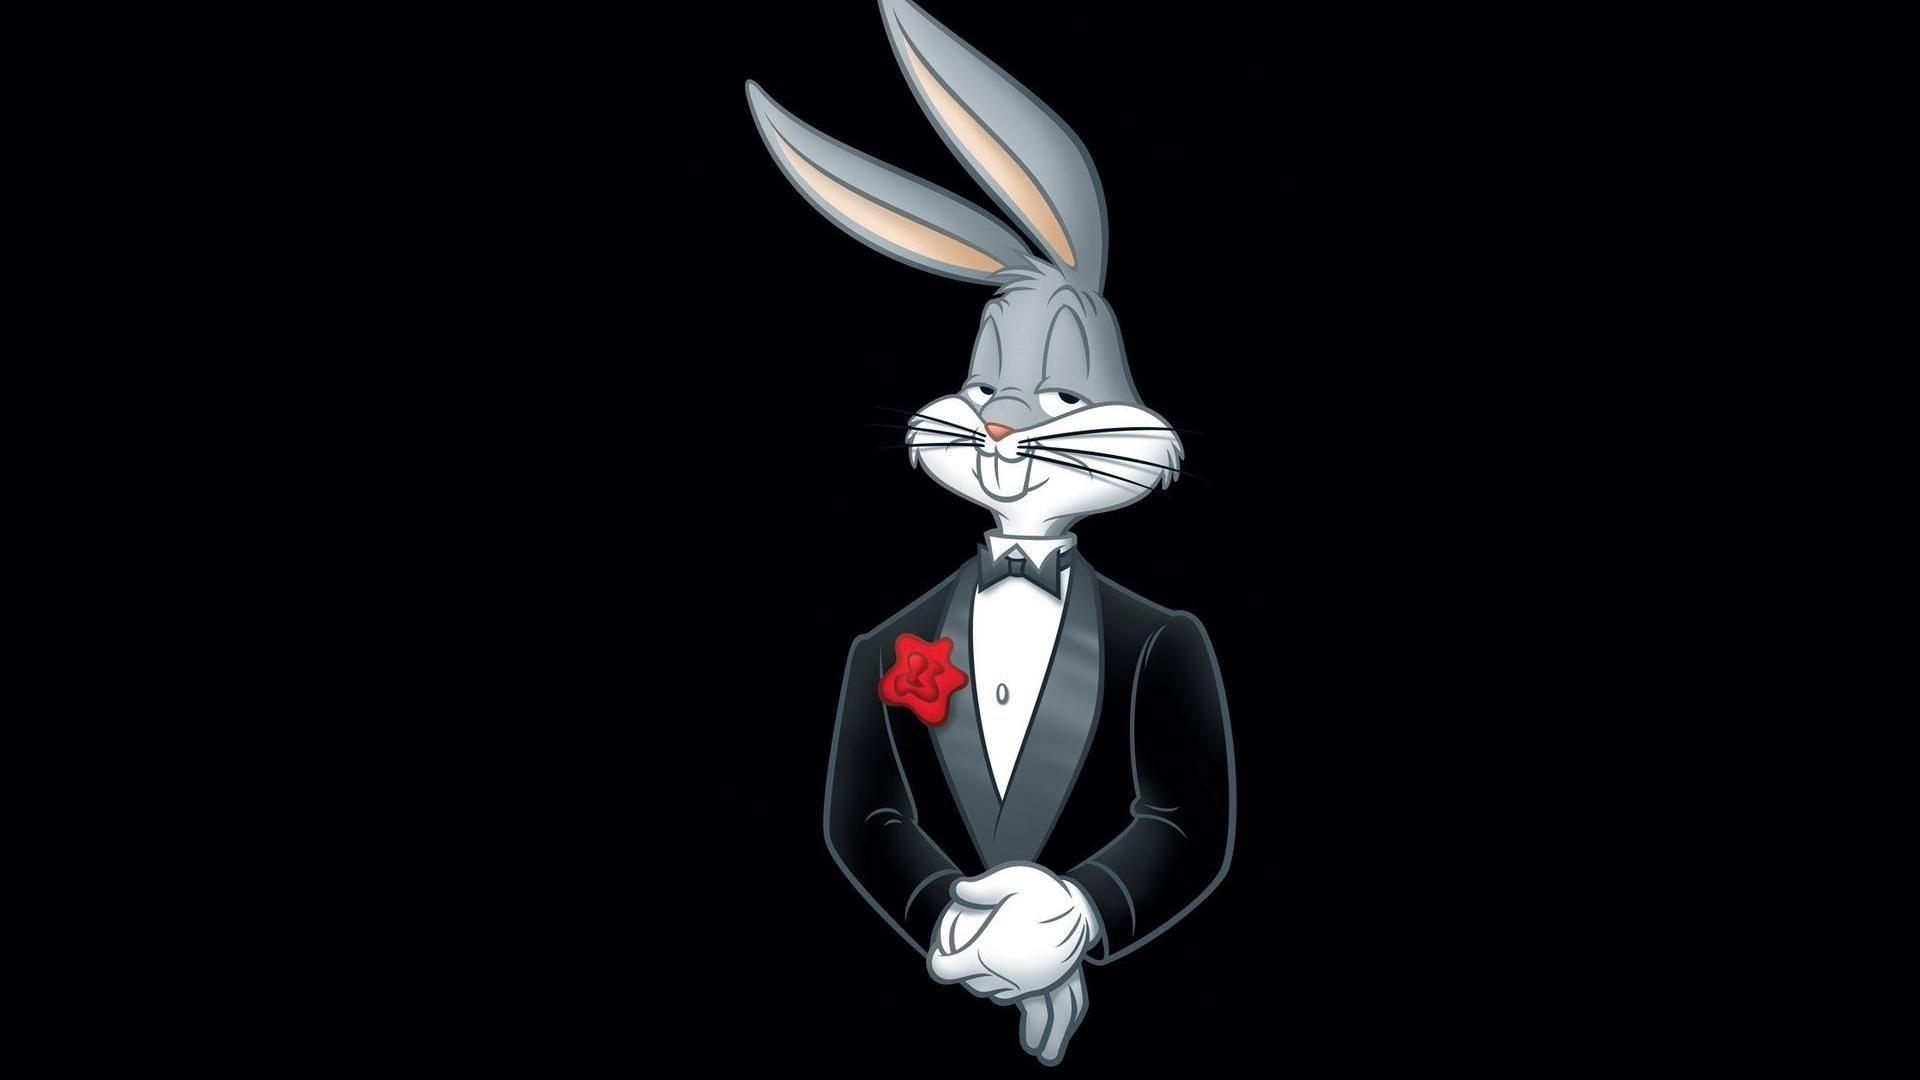 Cool Bugs Bunny Wallpapers - Top Free Cool Bugs Bunny Backgrounds